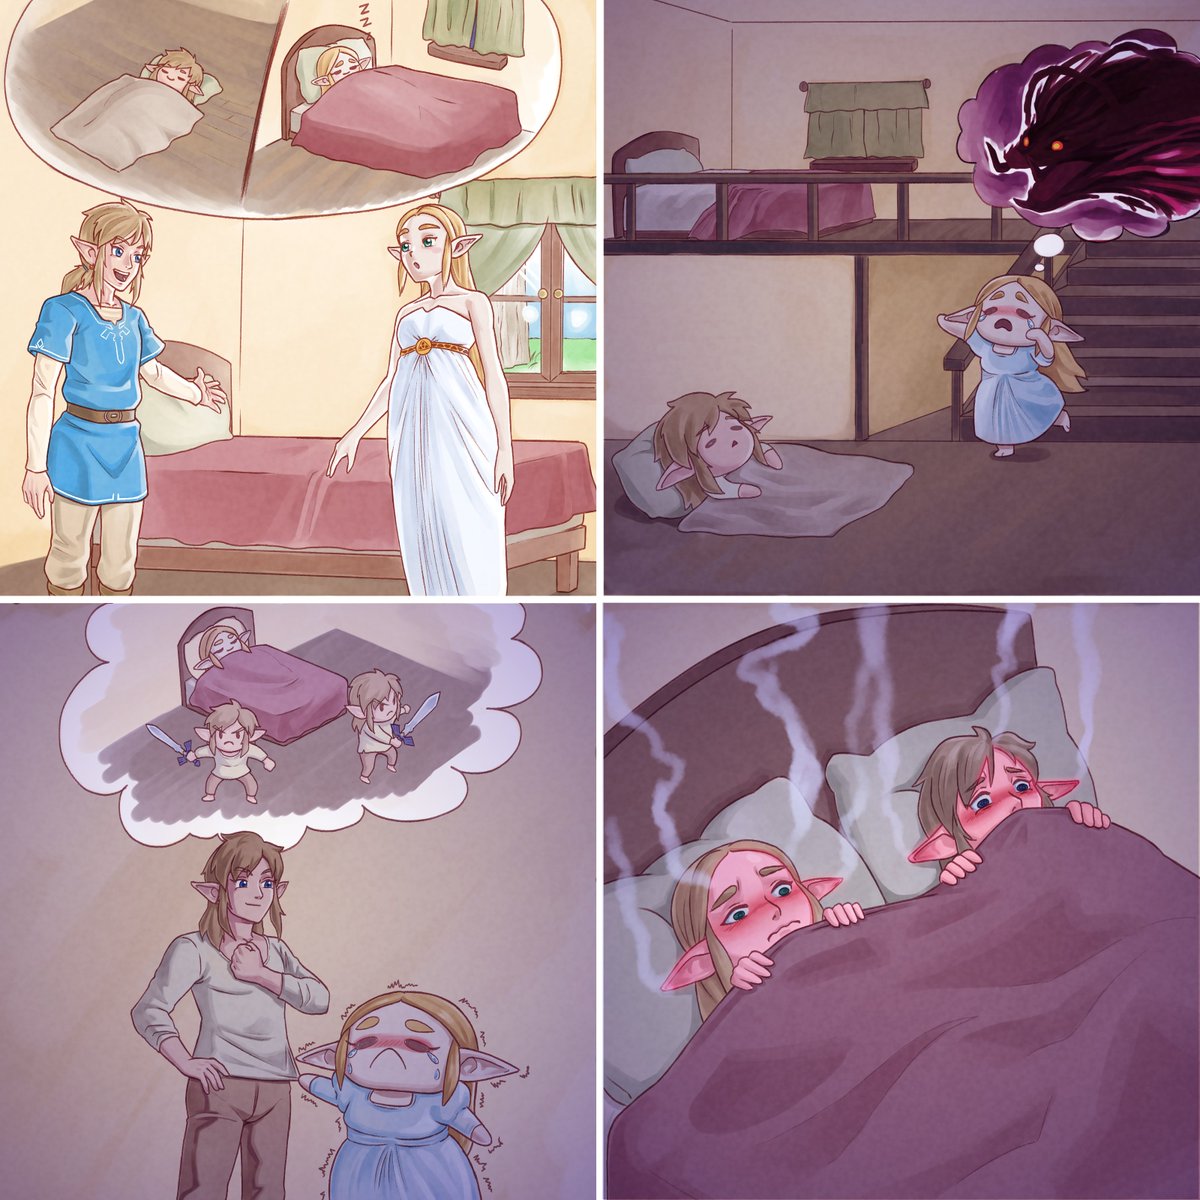 Link's and Zelda's first time sleeping in the same house (neither of them slept that night) #Zelda  #zelink #リンゼル #totk #ゼルダの伝説